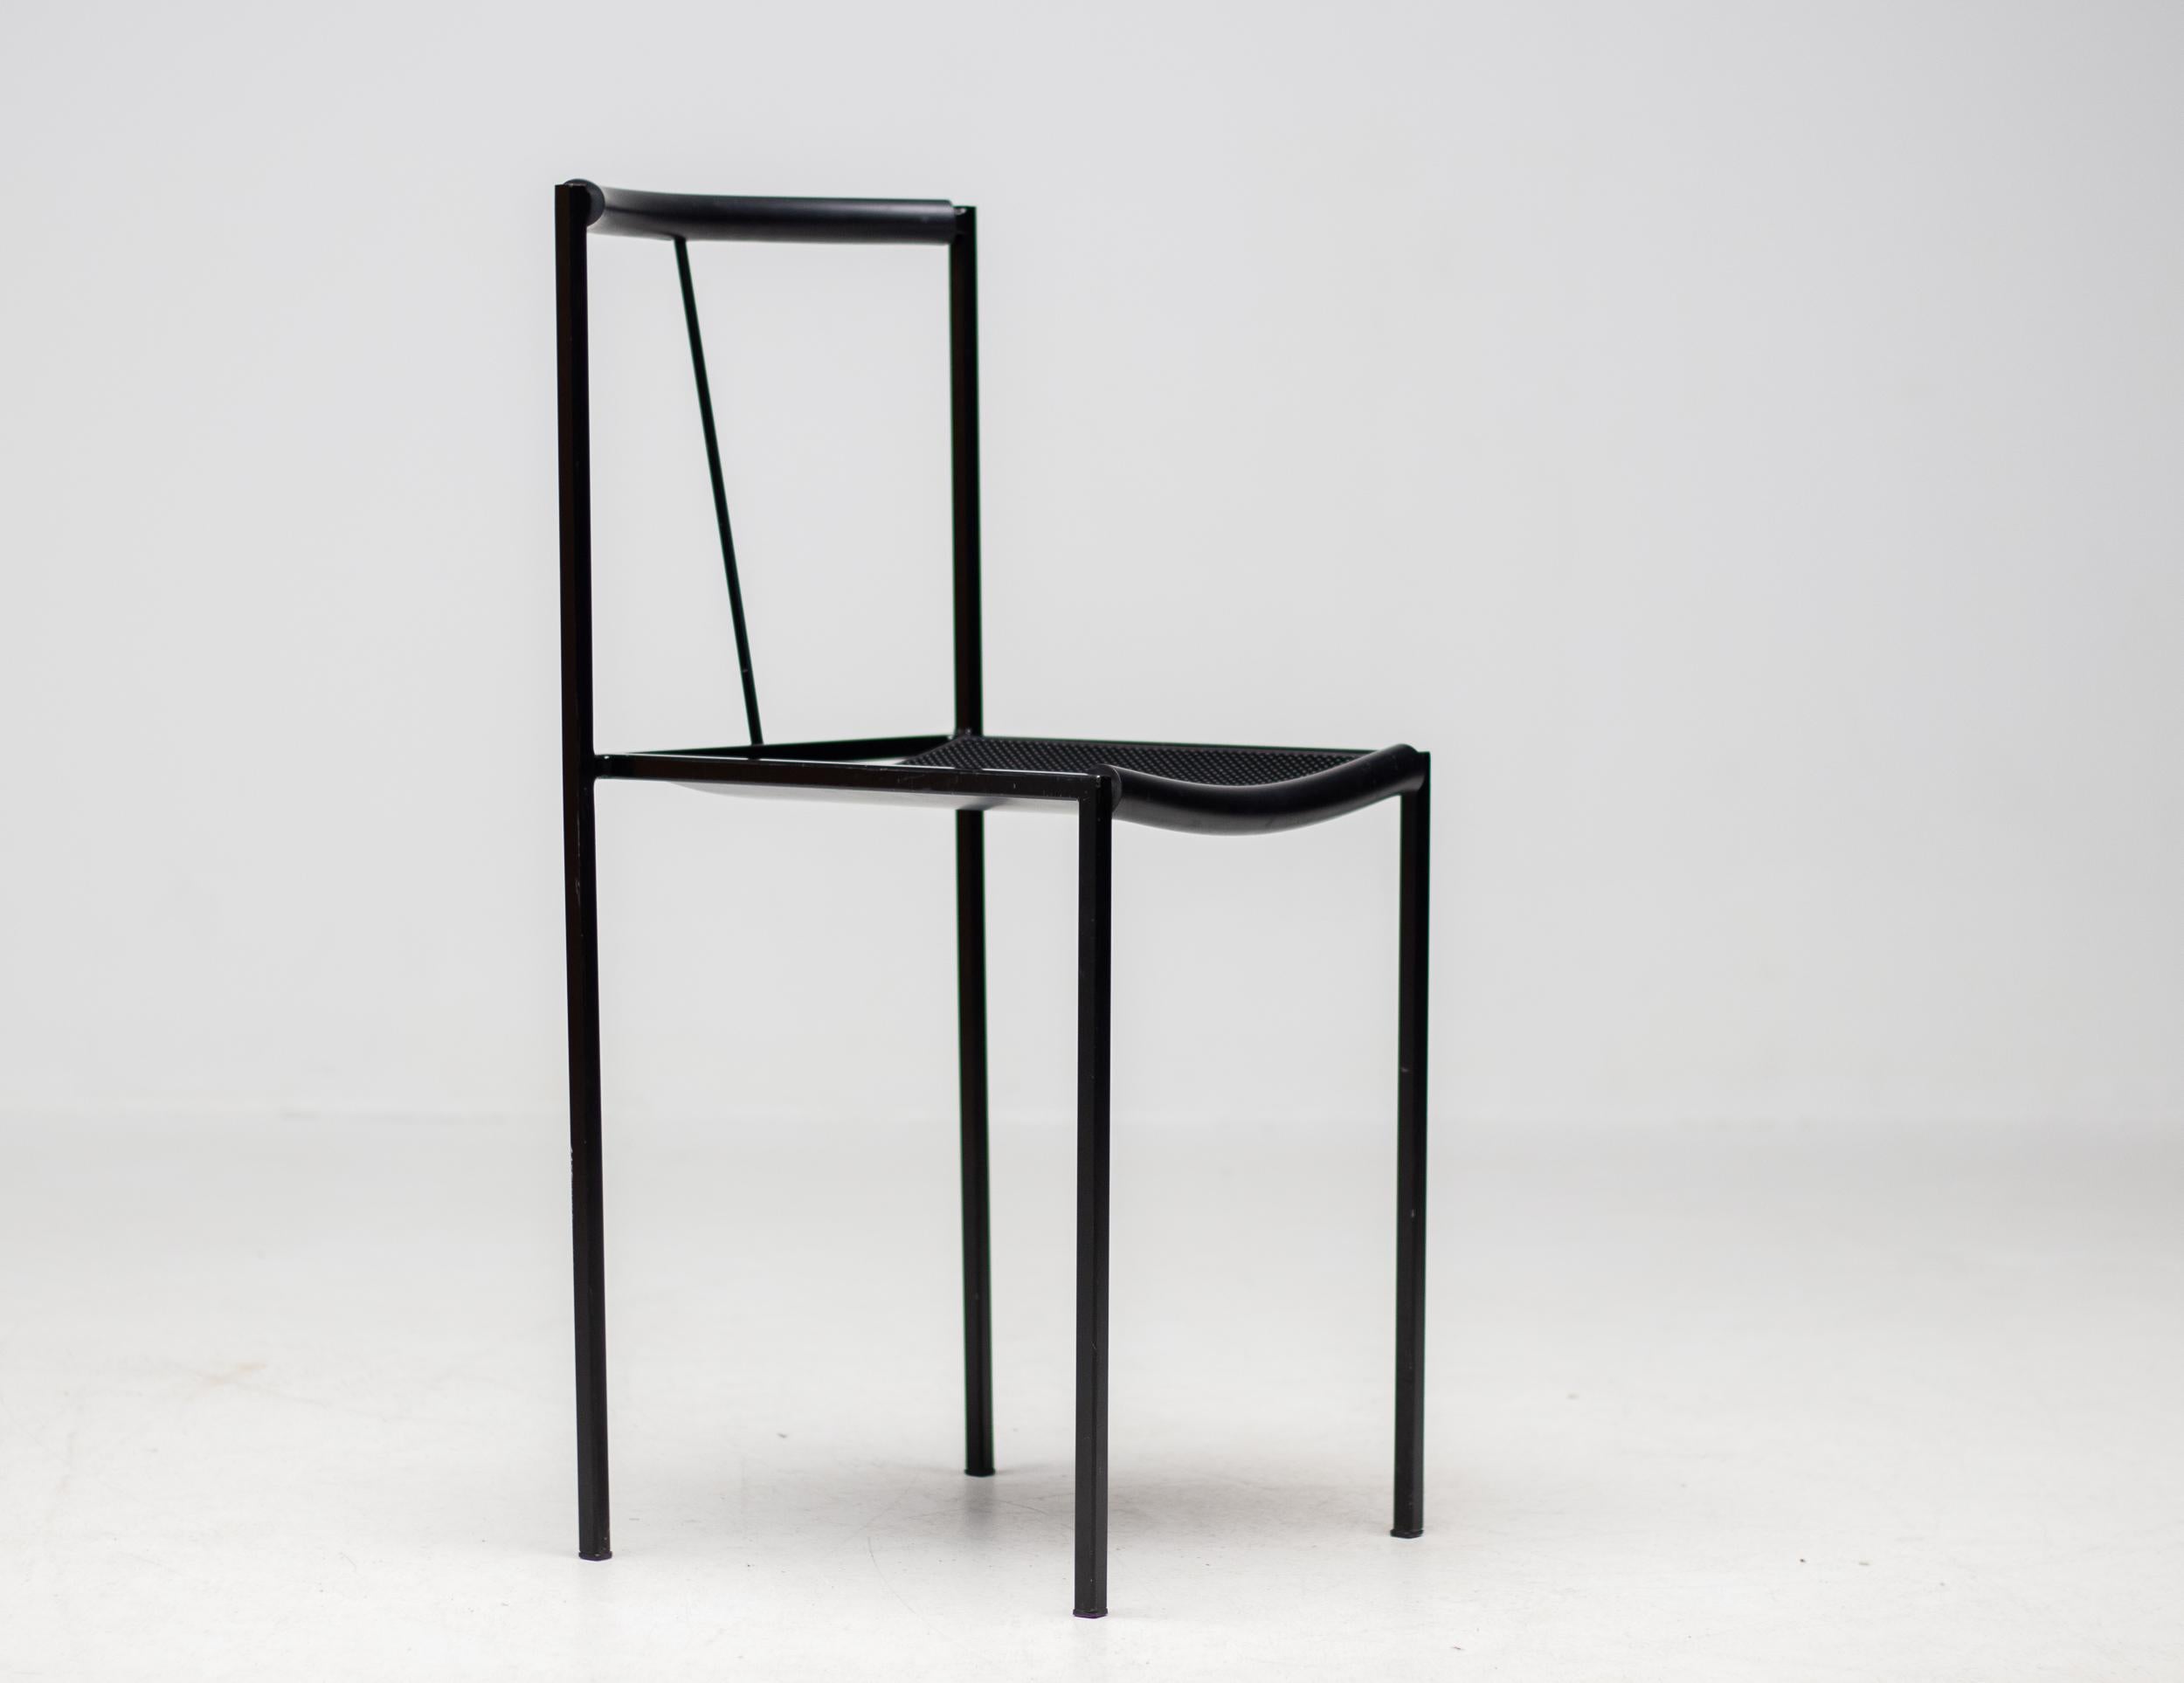 Powder-Coated Set of Six Poltroncina Chairs by Maurizio Peregalli